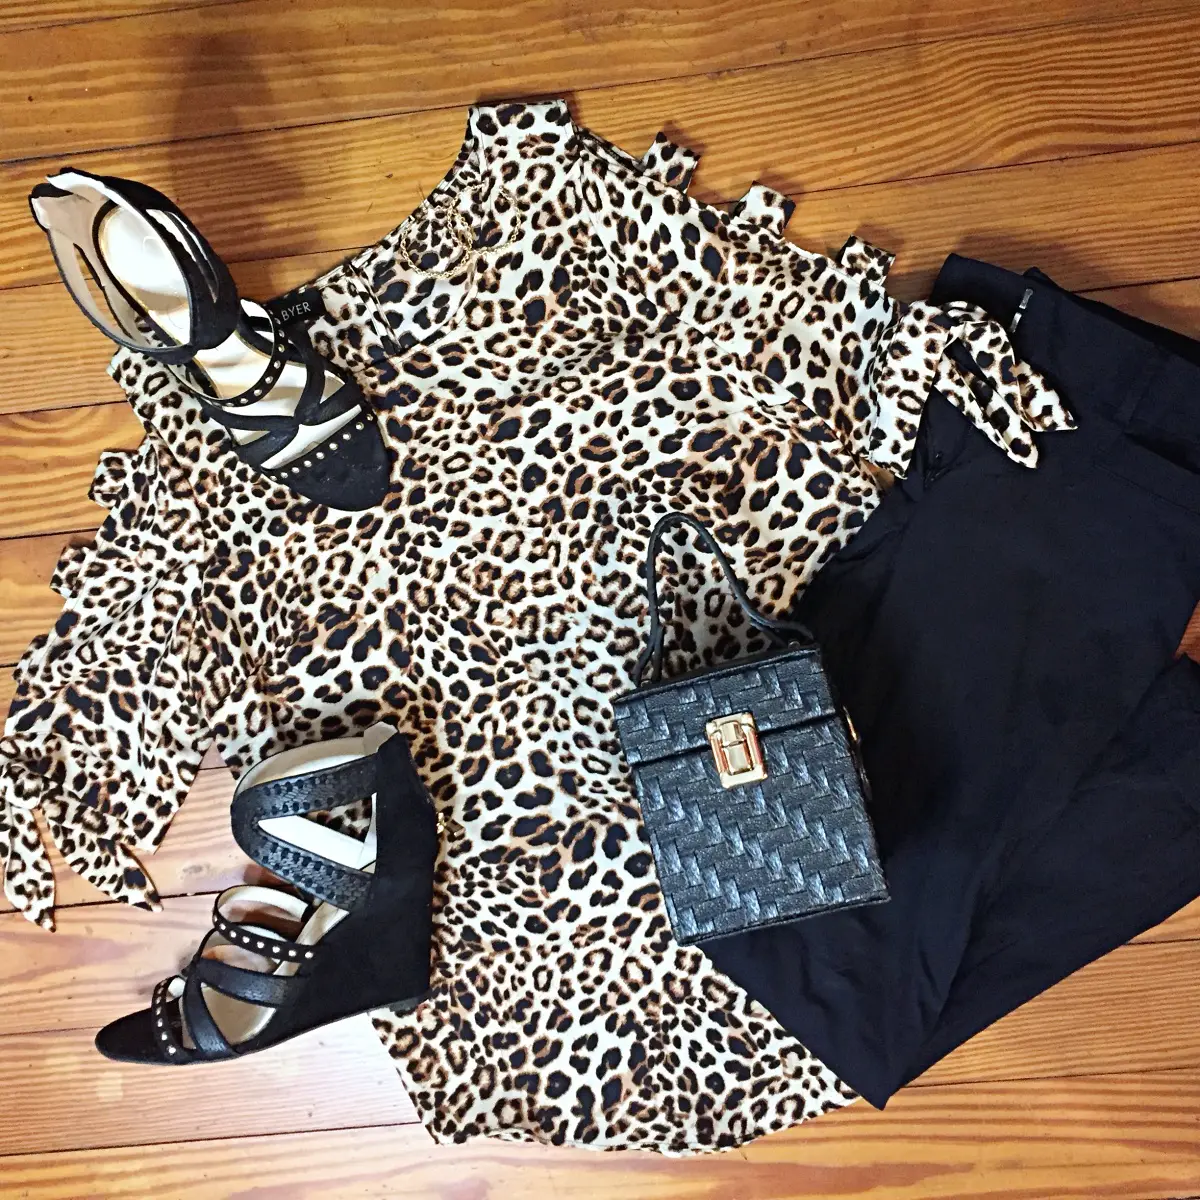 cutout sleeve leopard blouse outfit